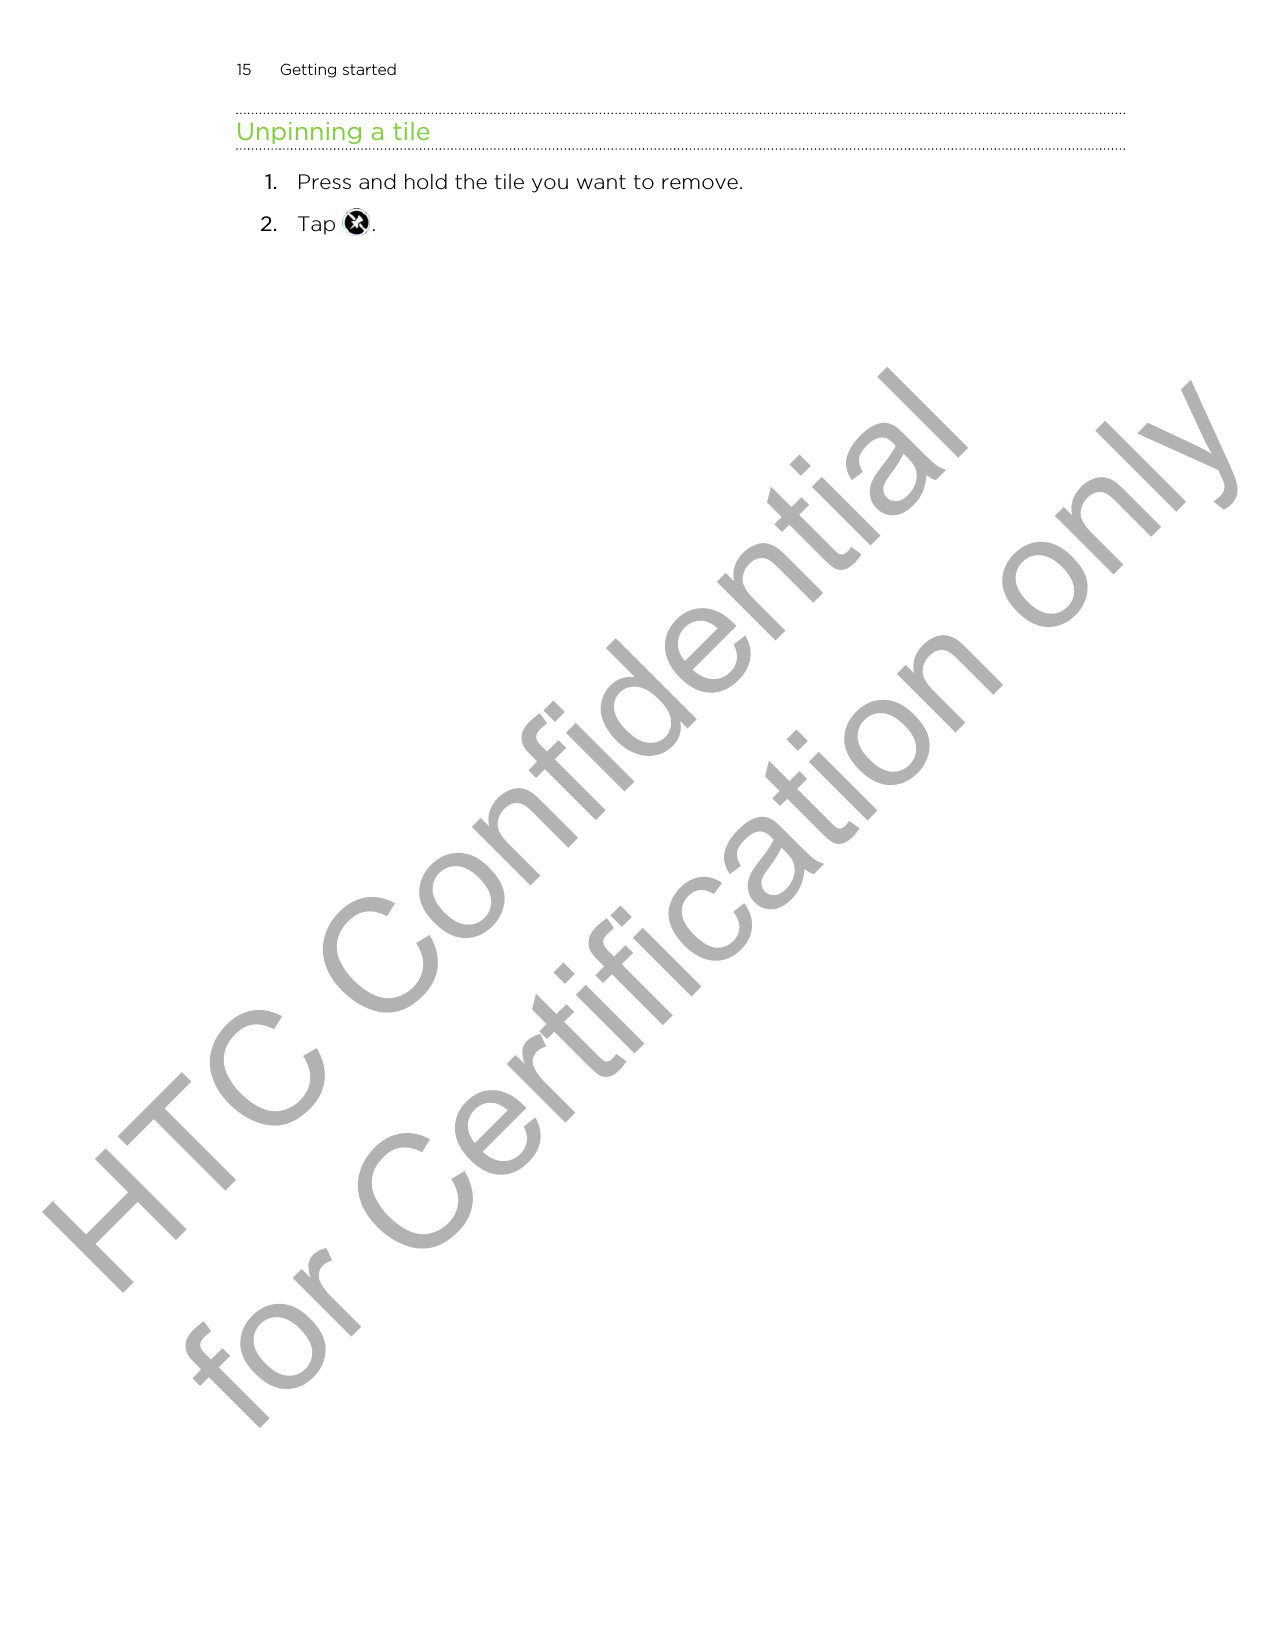 Unpinning a tile1. Press and hold the tile you want to remove.2. Tap  .15 Getting startedHTC Confidential for Certification only